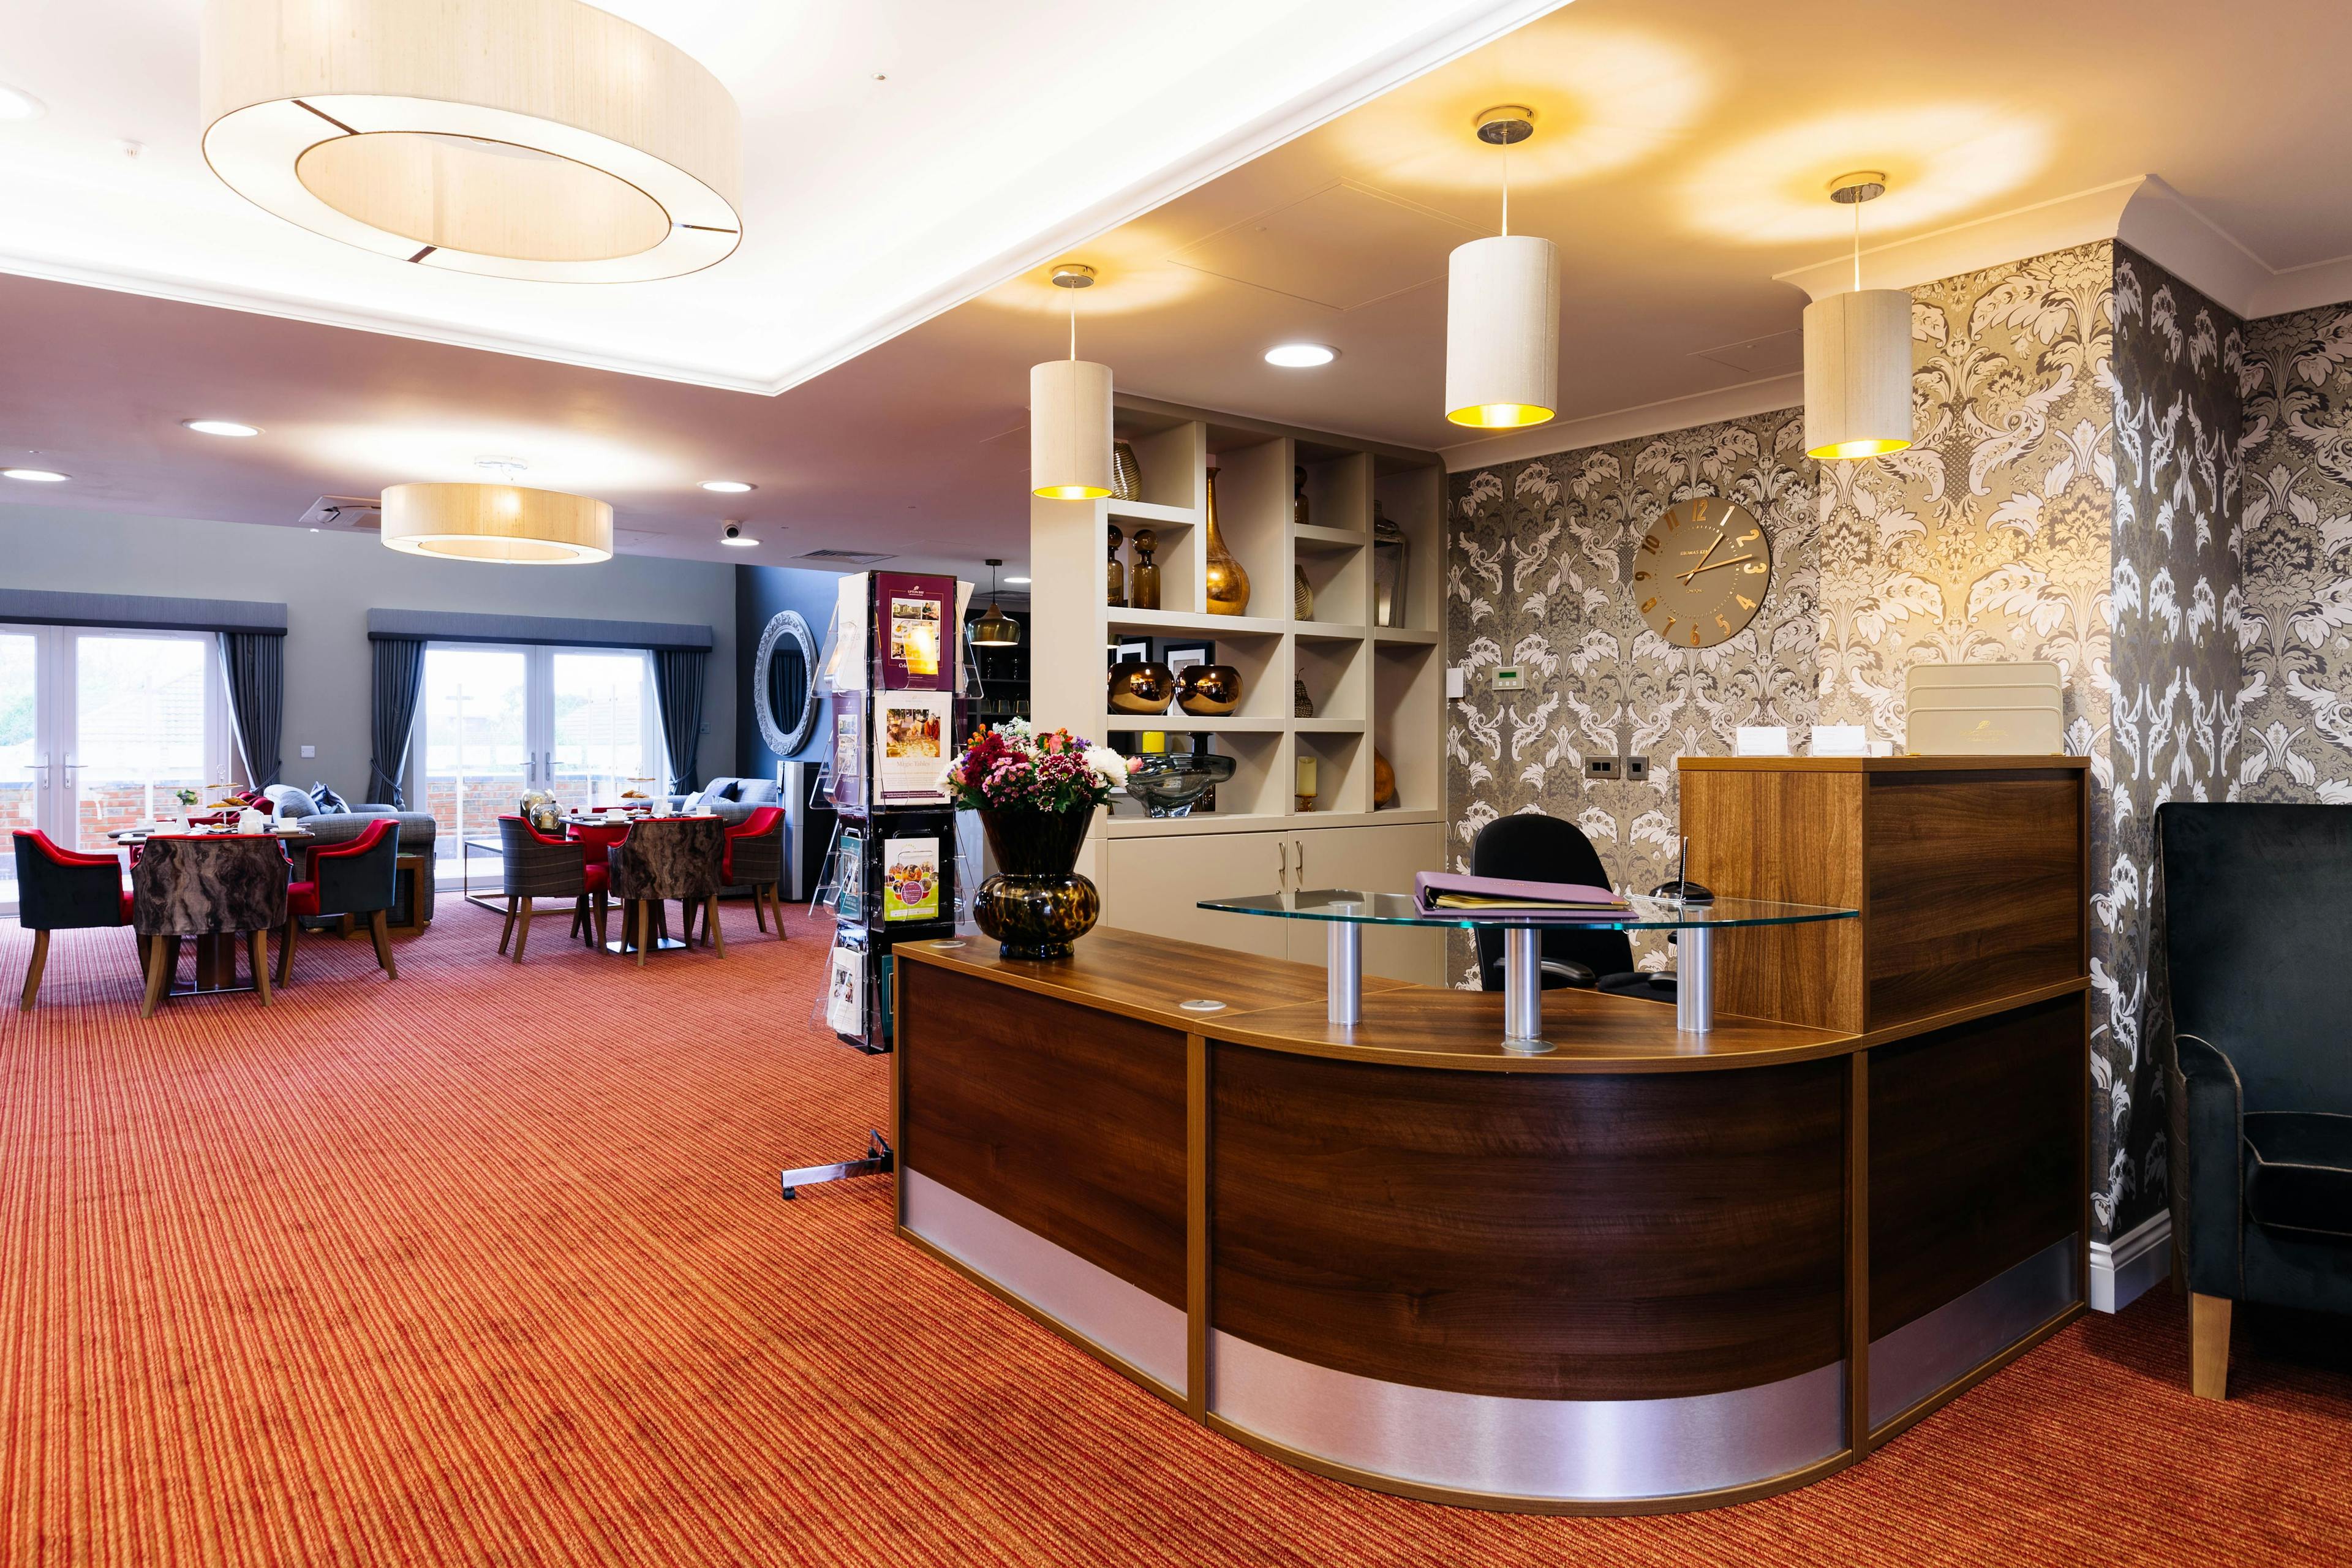 Reception of Upton Bay Care Home in Poole, Dorset